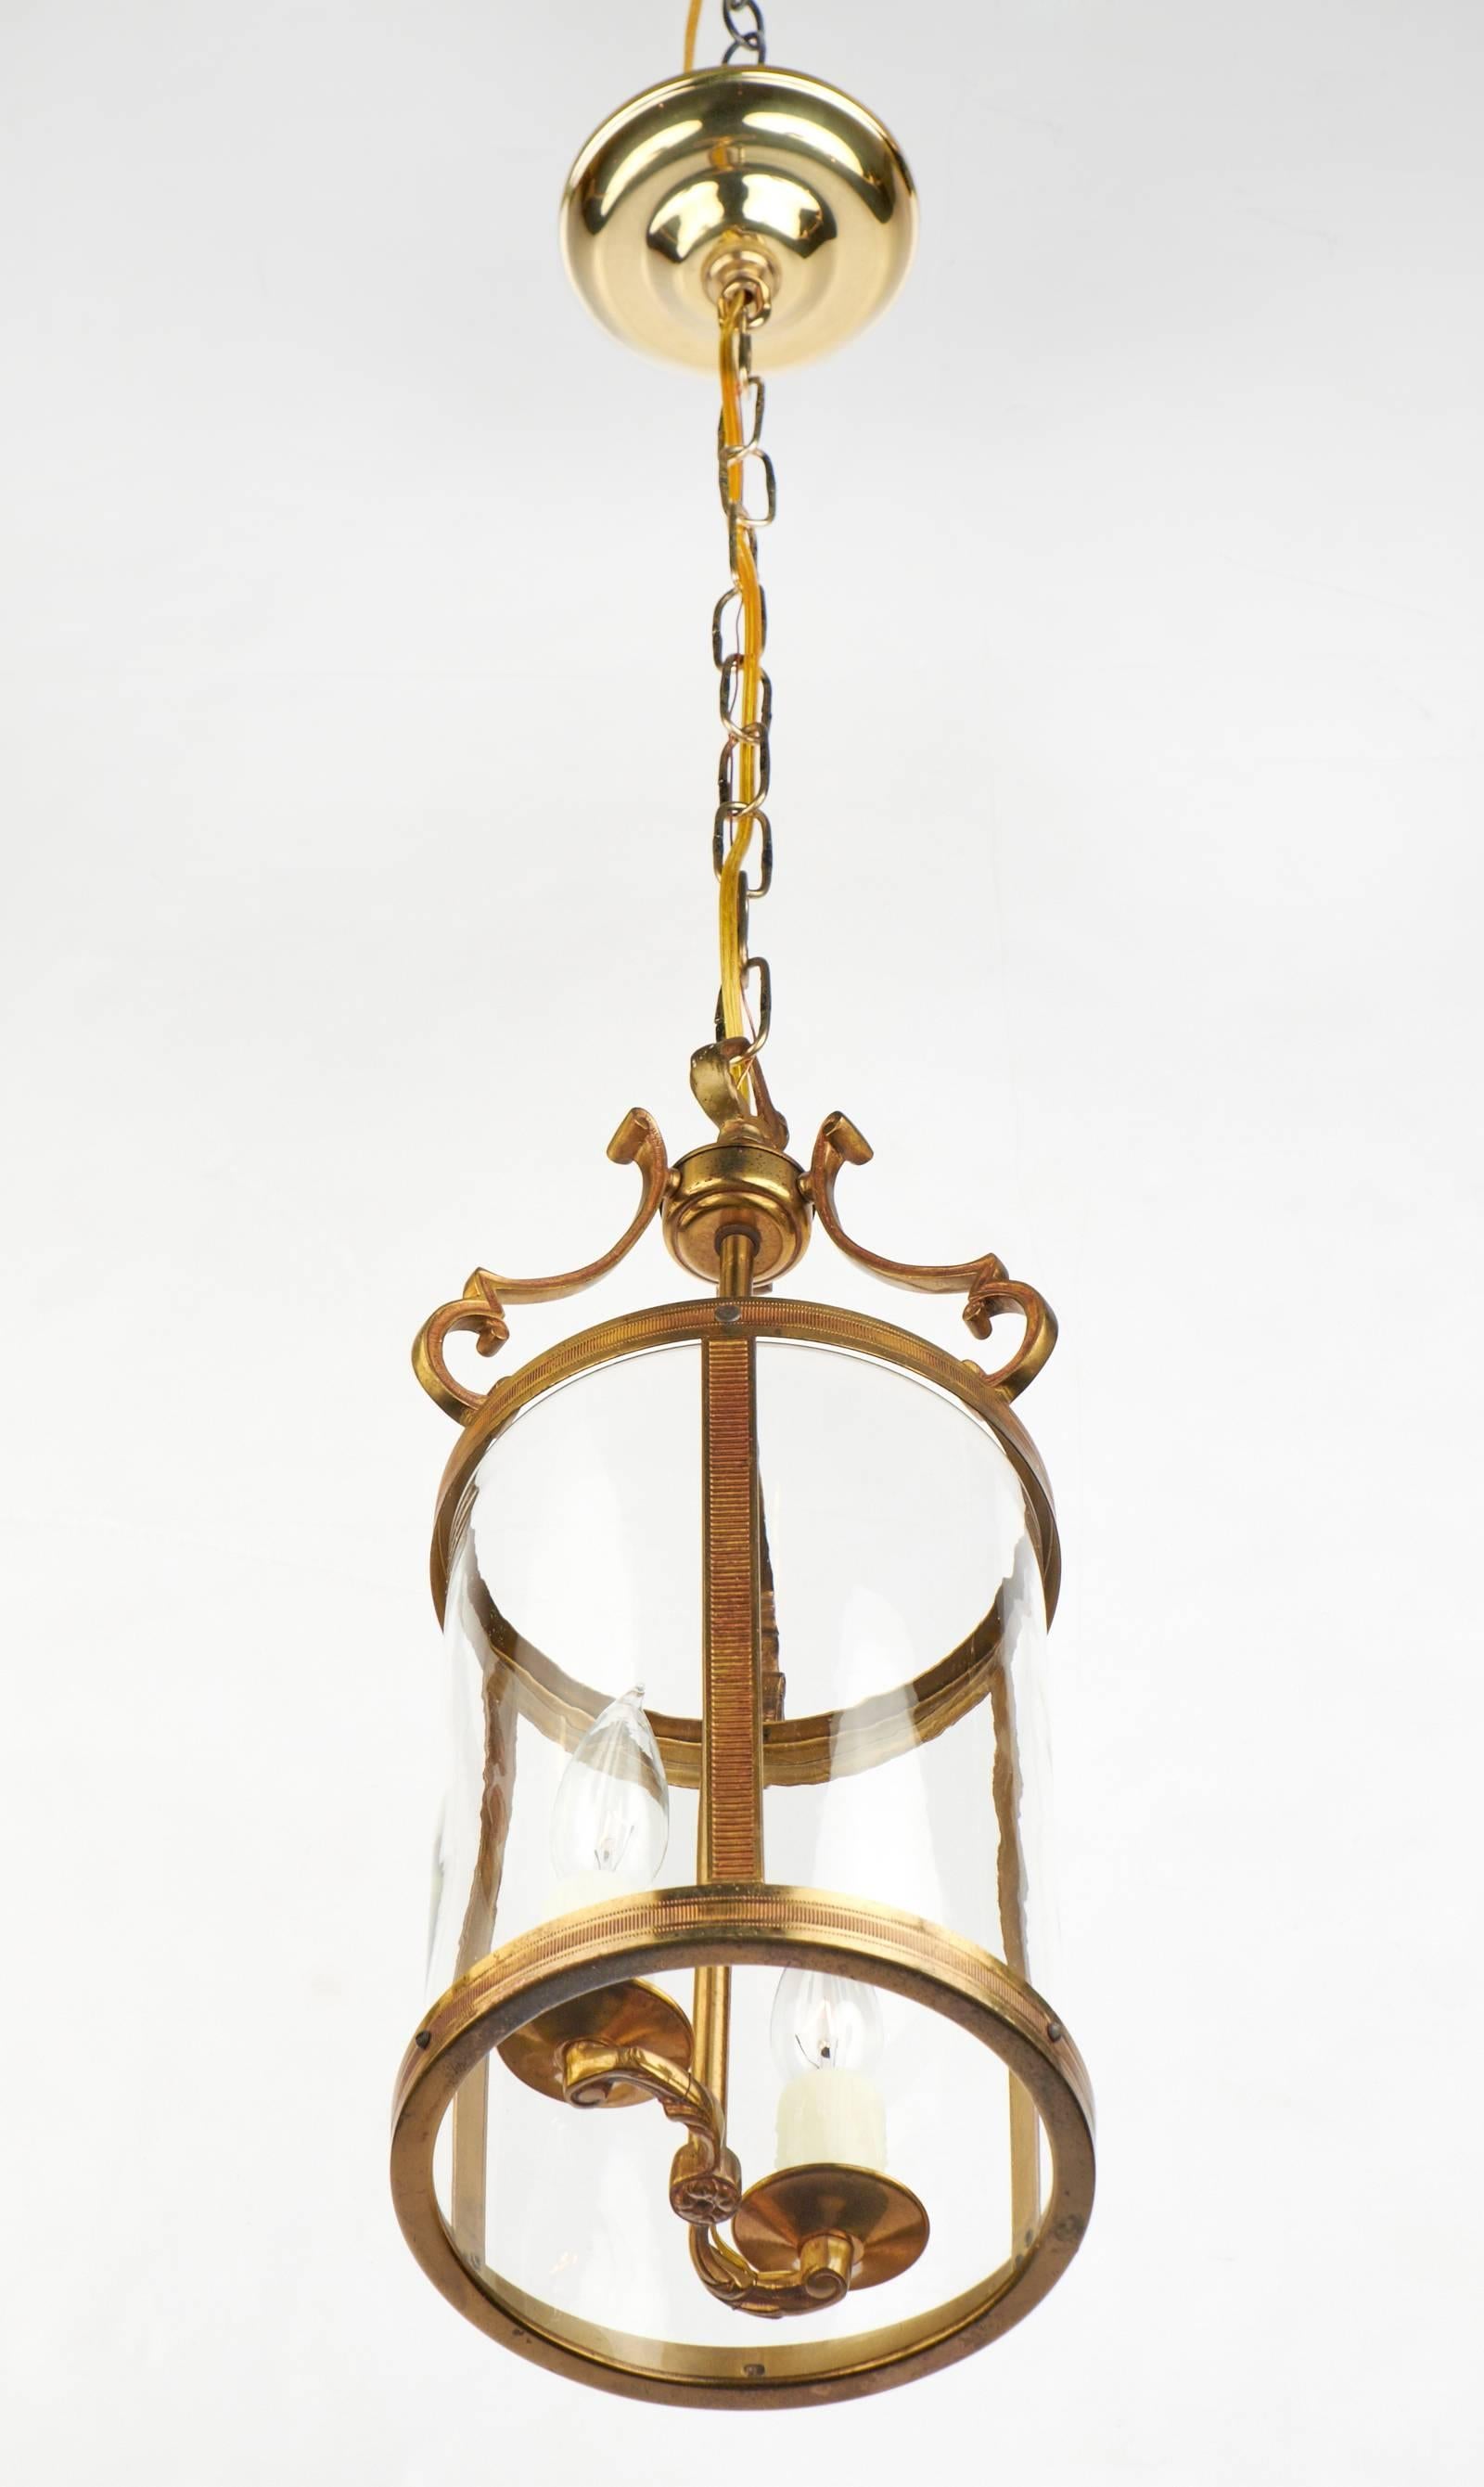 Bronze circa 1900 French lantern with rounded glass and finely cast cluster.

Diameter is taken at the brass rings, decorative arms extend slightly further. Height with included chain and canopy is 38.375 in.